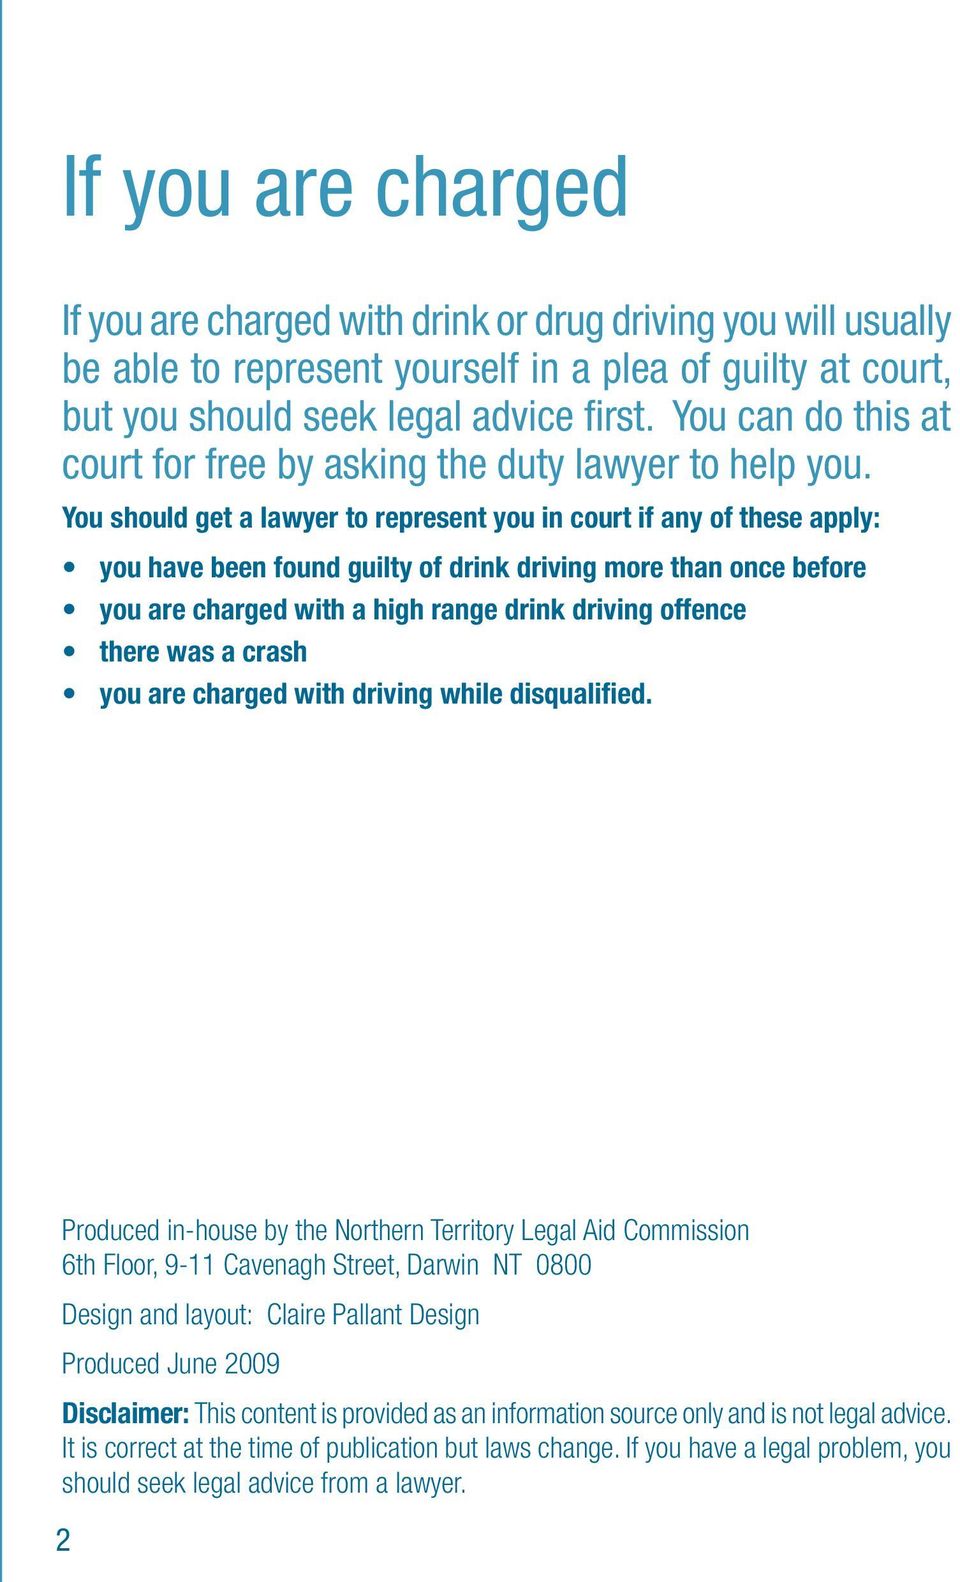 You should get a lawyer to represent you in court if any of these apply: you have been found guilty of drink driving more than once before you are charged with a high range drink driving offence